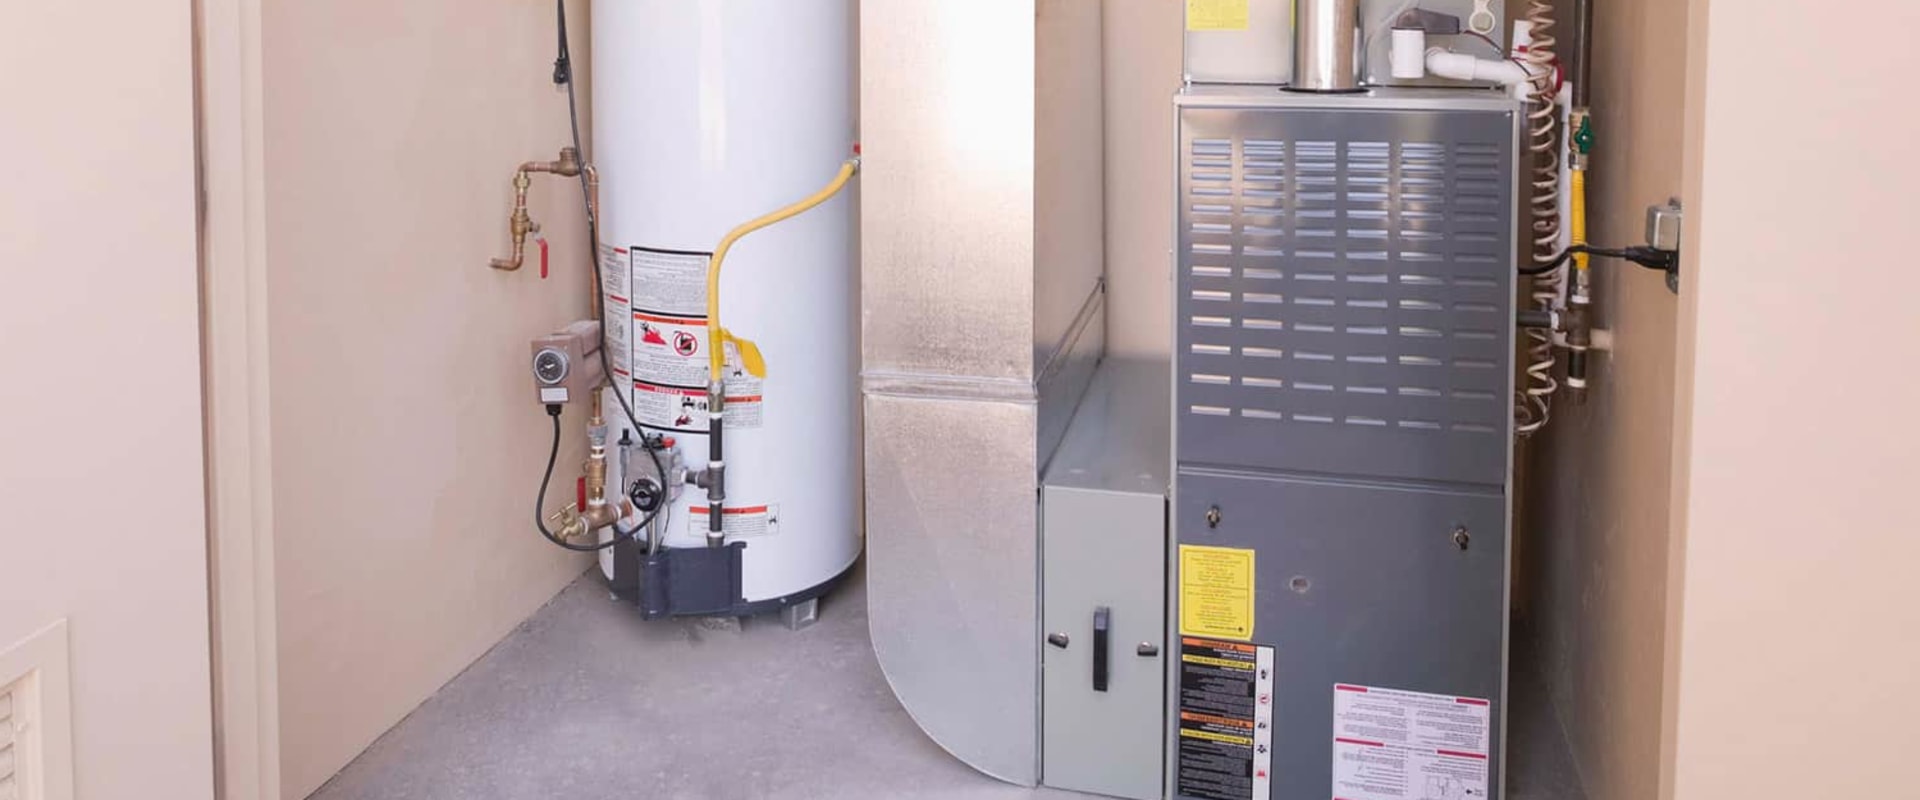 The Importance of Obtaining a Permit for Installing a Hot Water Heater in California